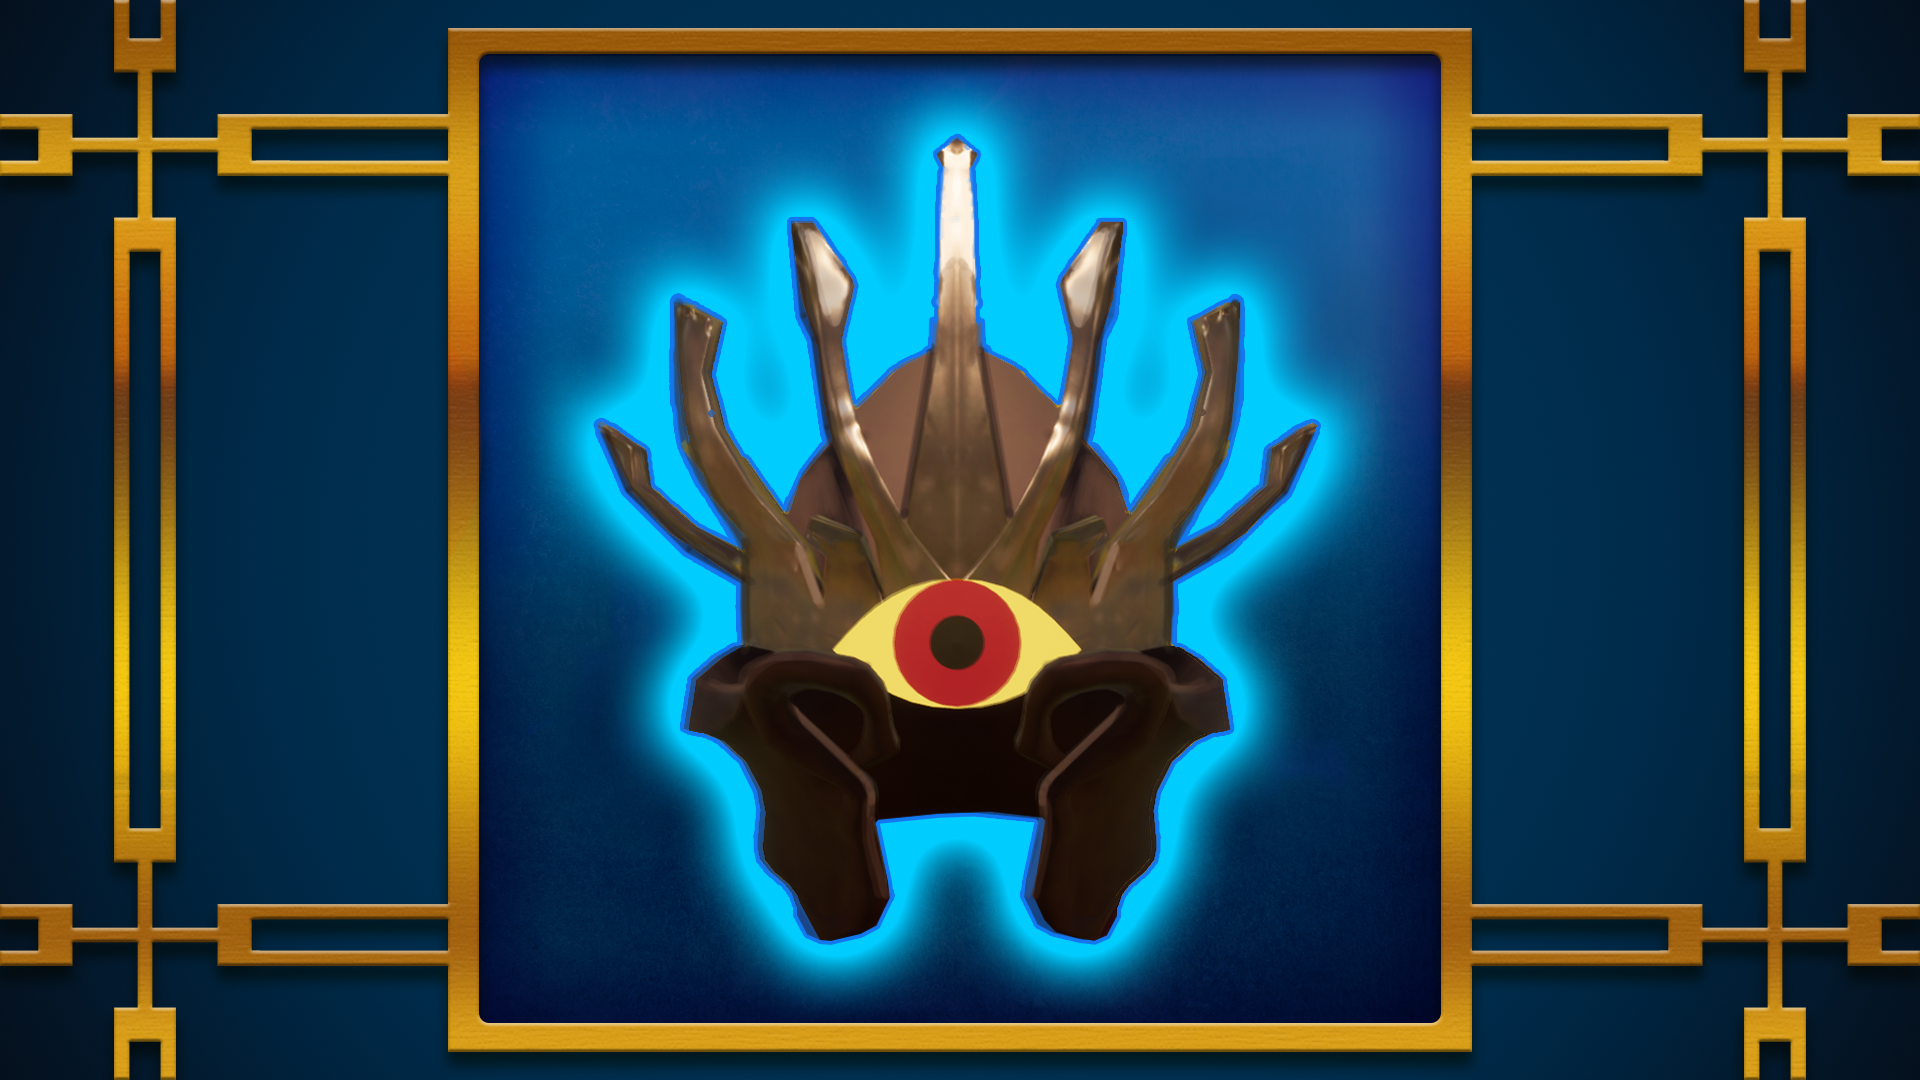 Icon for Herald of Chaos